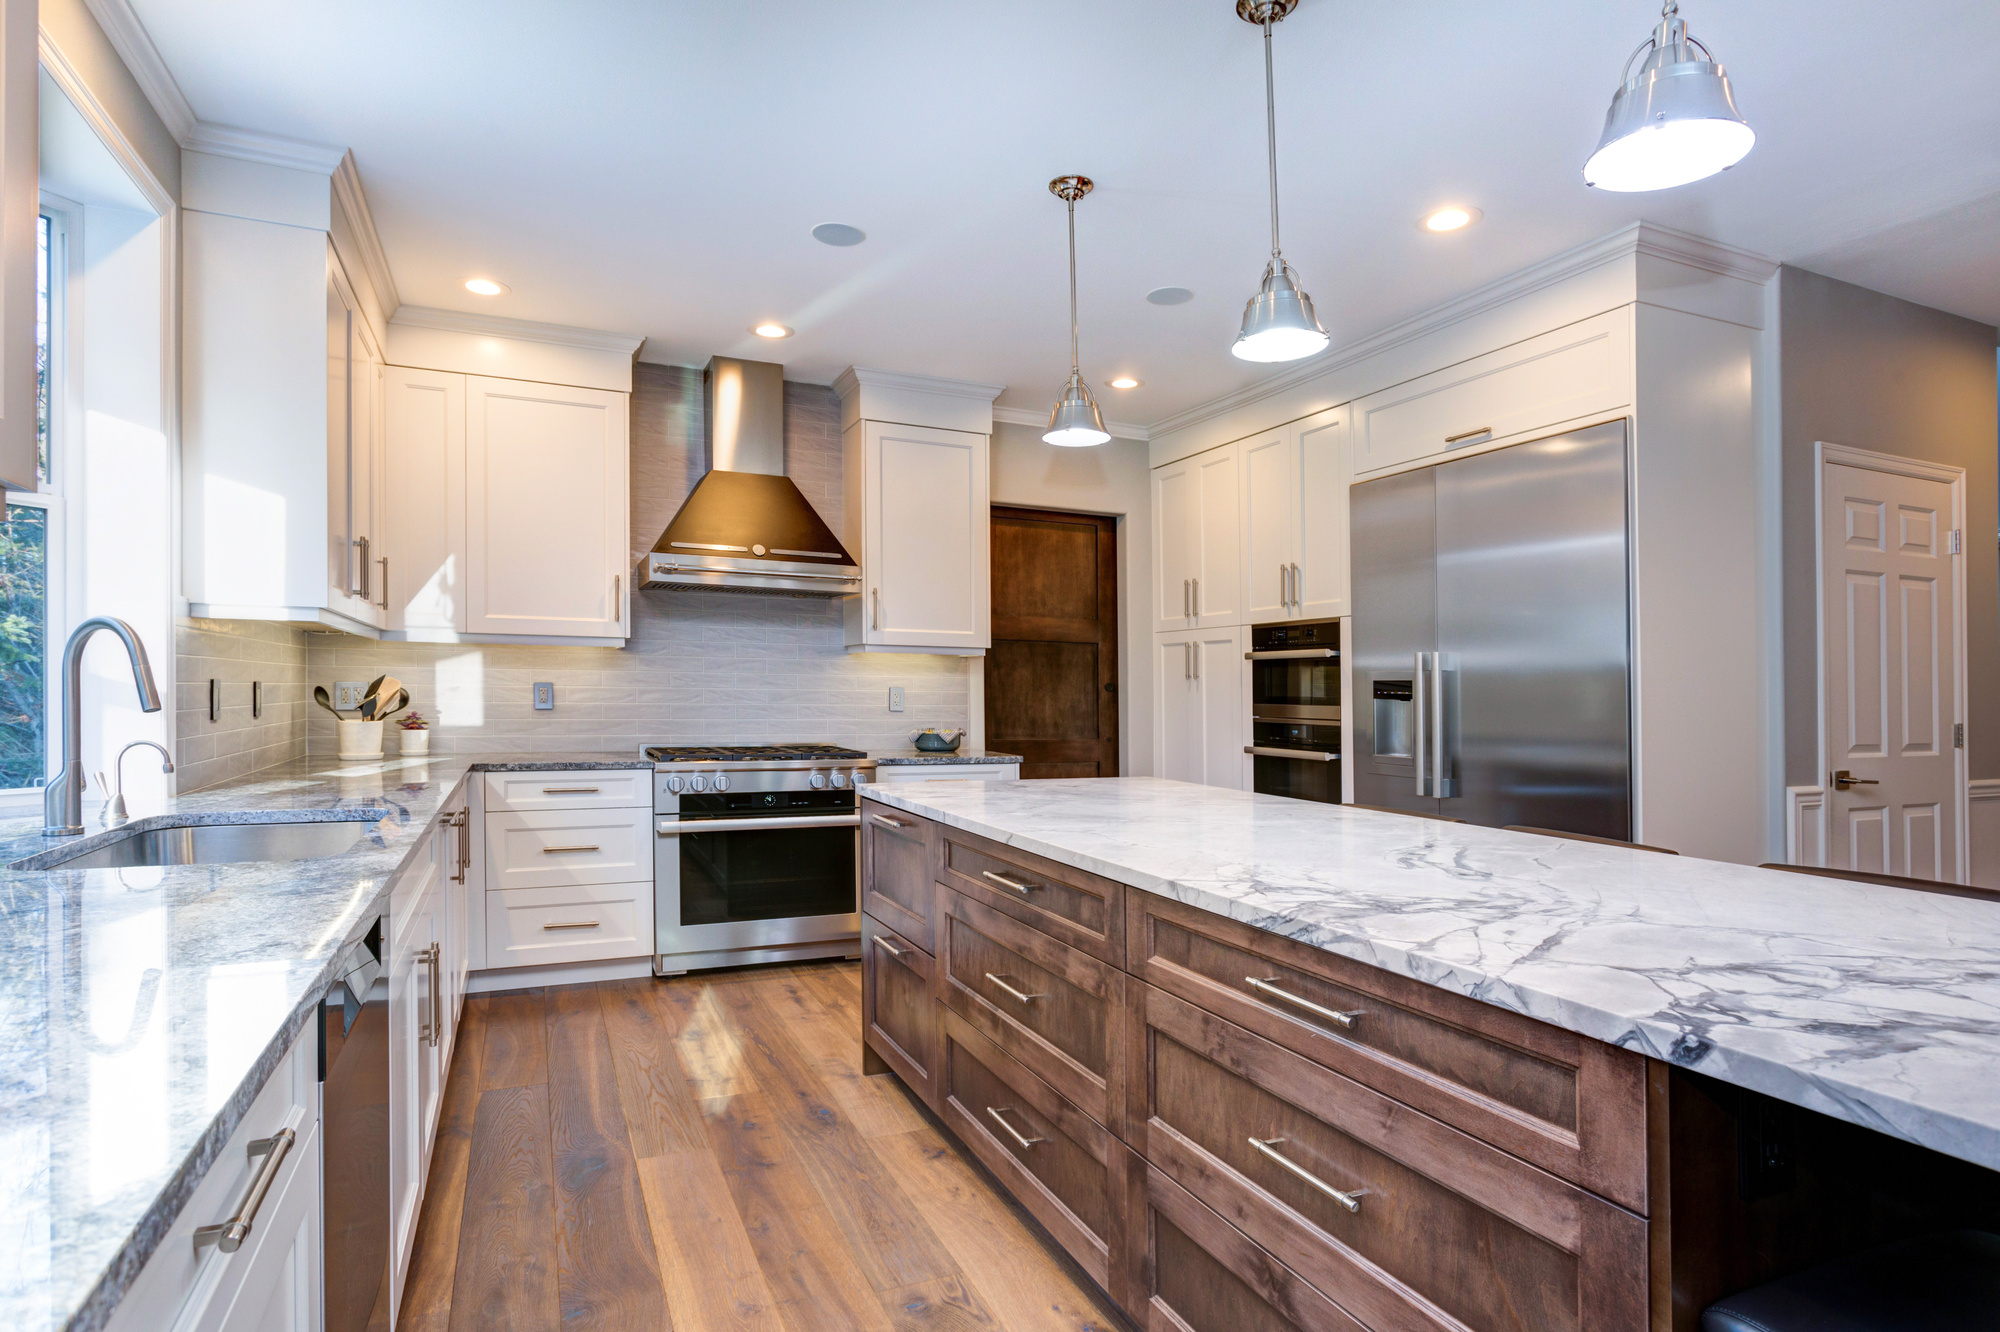 kitchen remodeling granite cabinets marble stone ultimate match natural countertop fabricators guide flooring requests still why list long fabrication maintenance